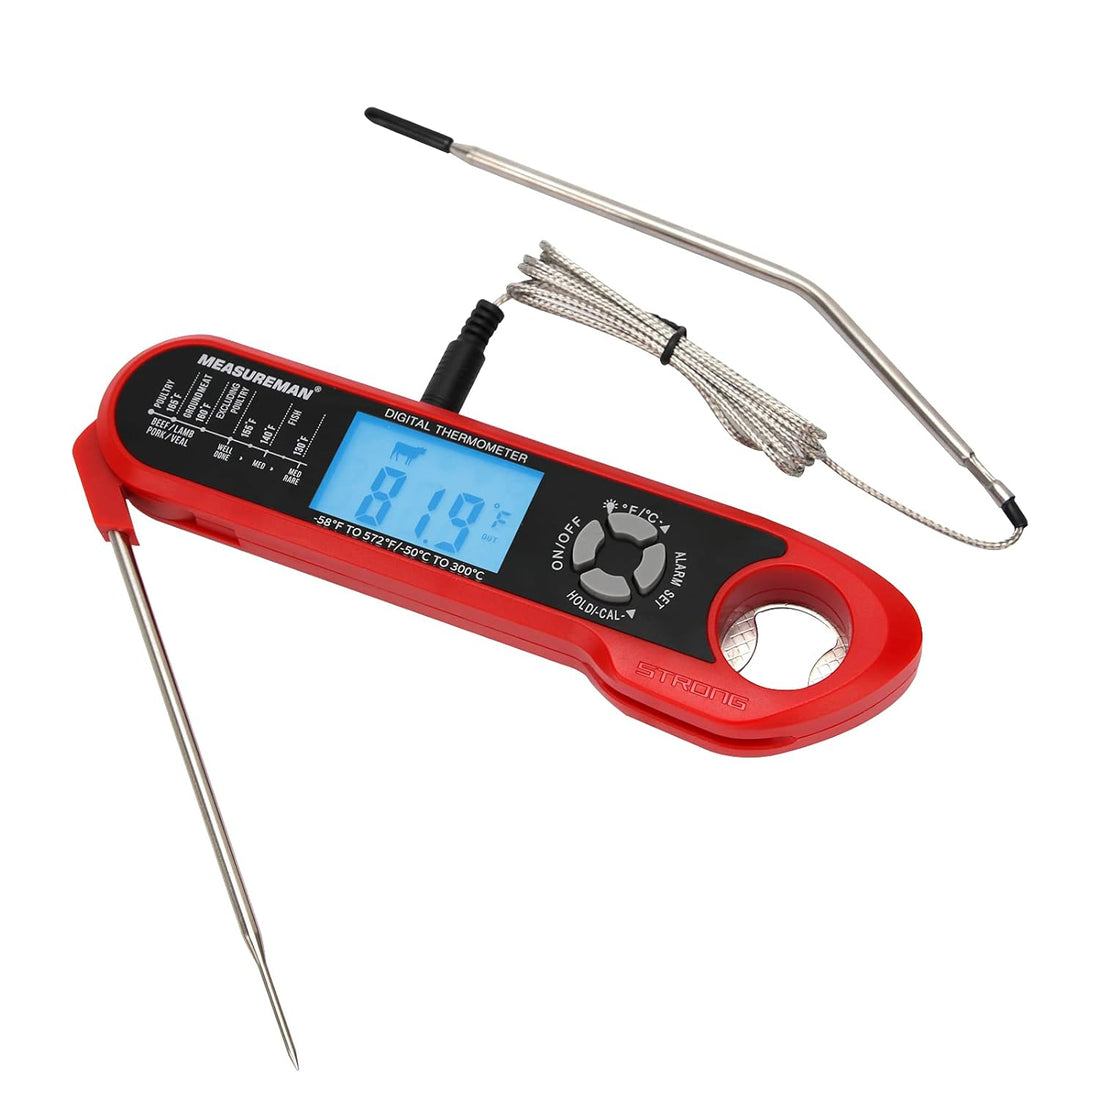 MEASUREMAN Digital Meat-Thermometer Instant-Read Food Temperature-Probe - with Magnet Calibration Thermometer Waterproof for Kitchen Cooking Grill BBQ Oven Candy